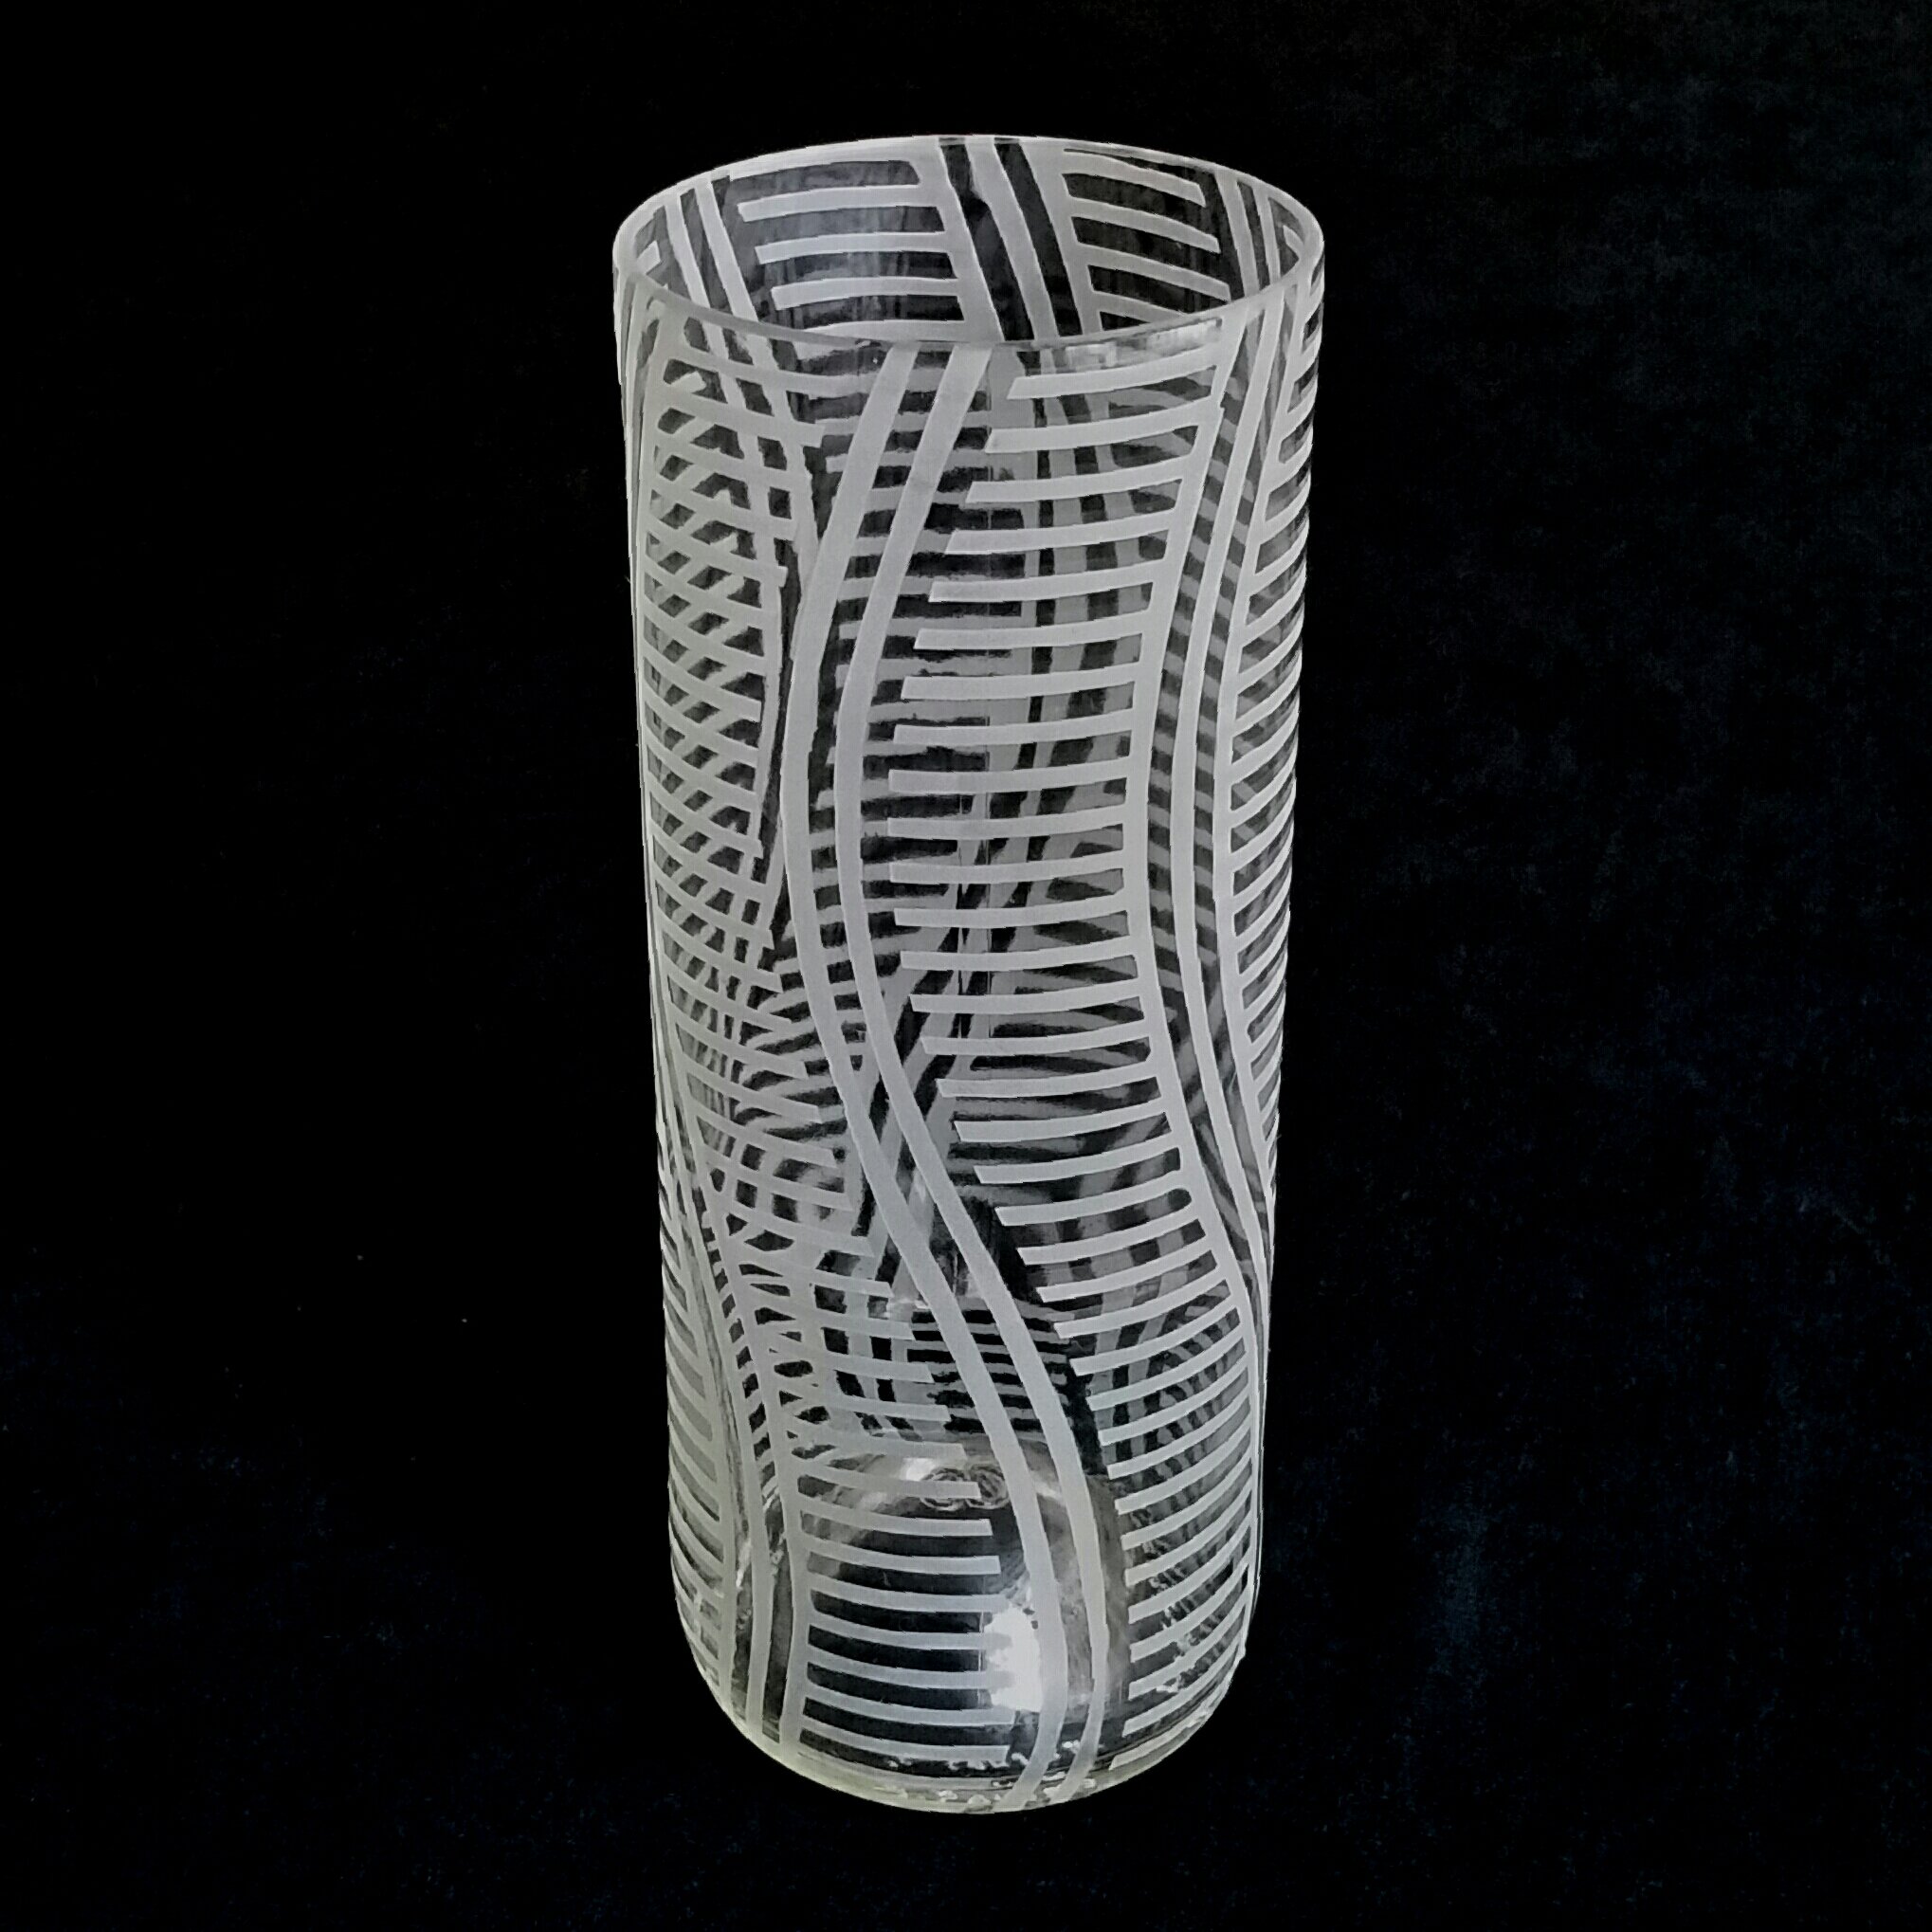 Helical - $45